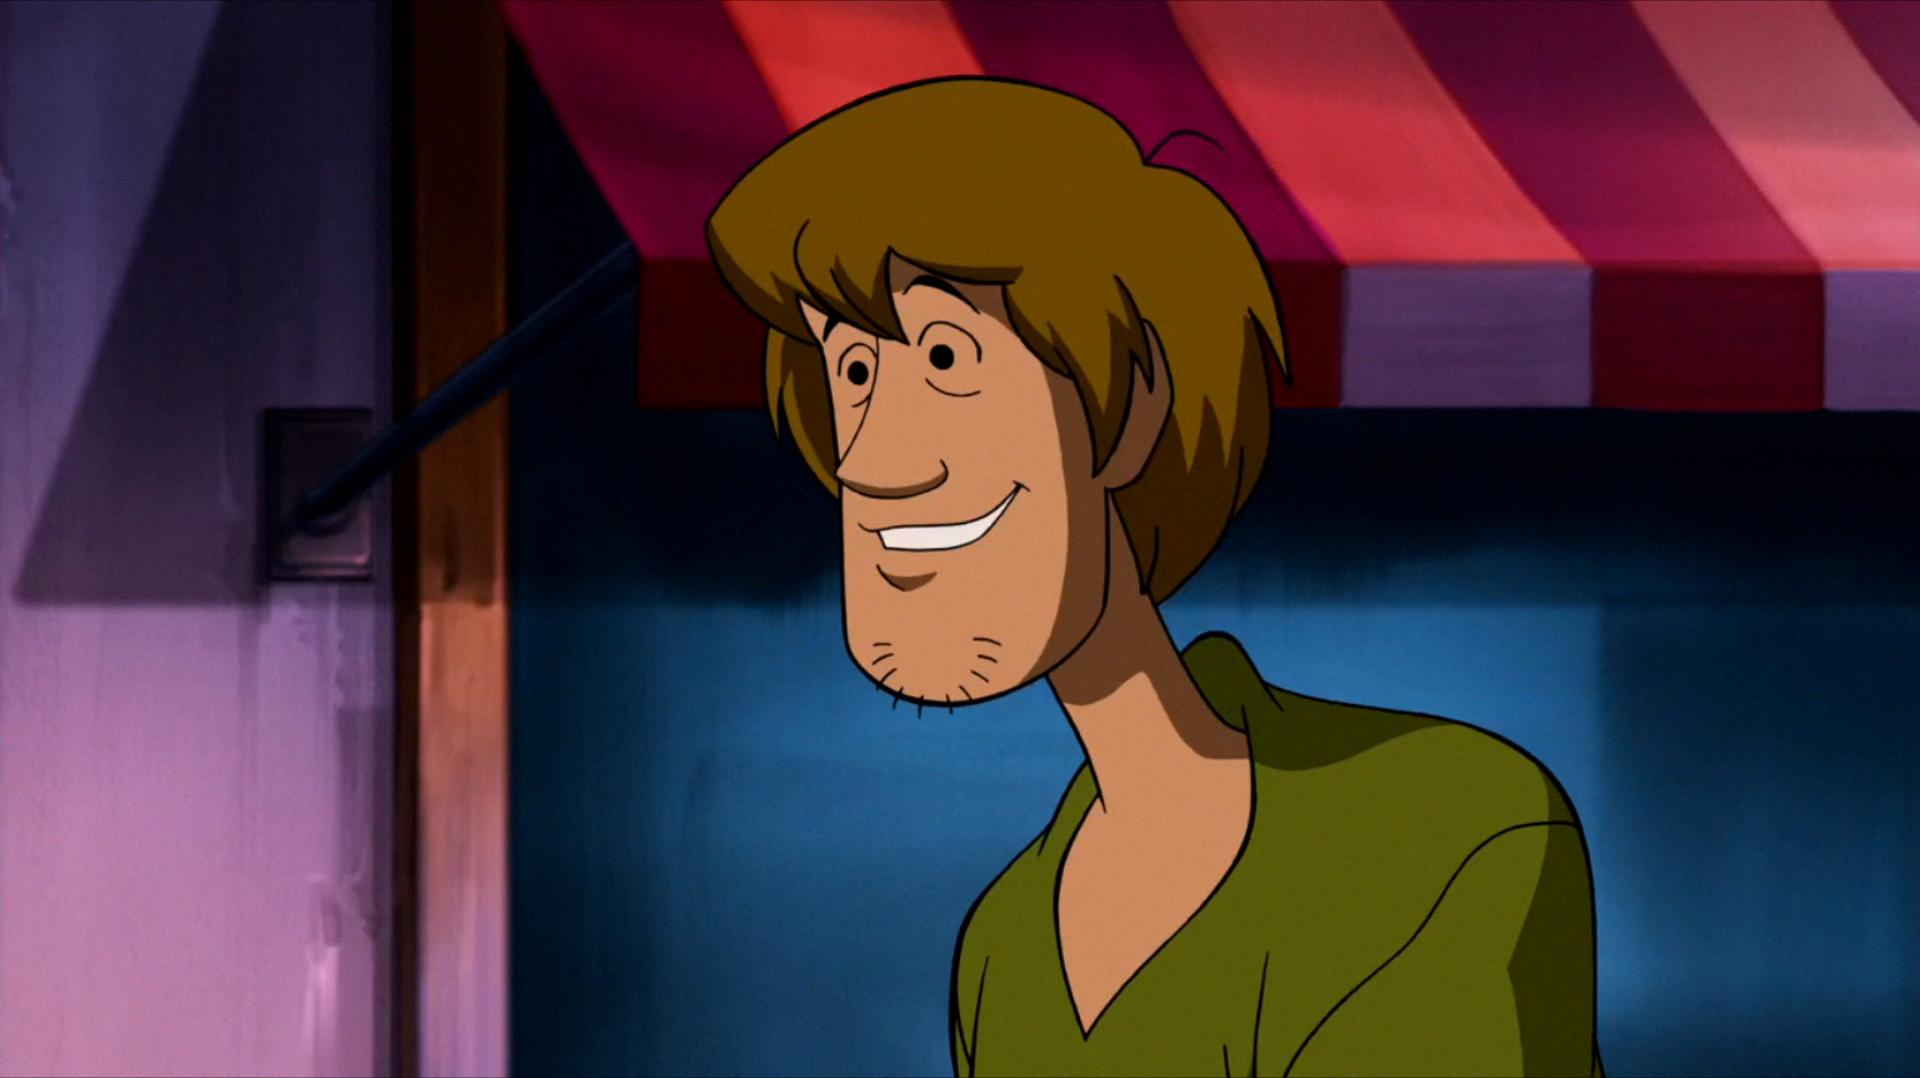 Shaggy from Scooby Doo - A Short Overview